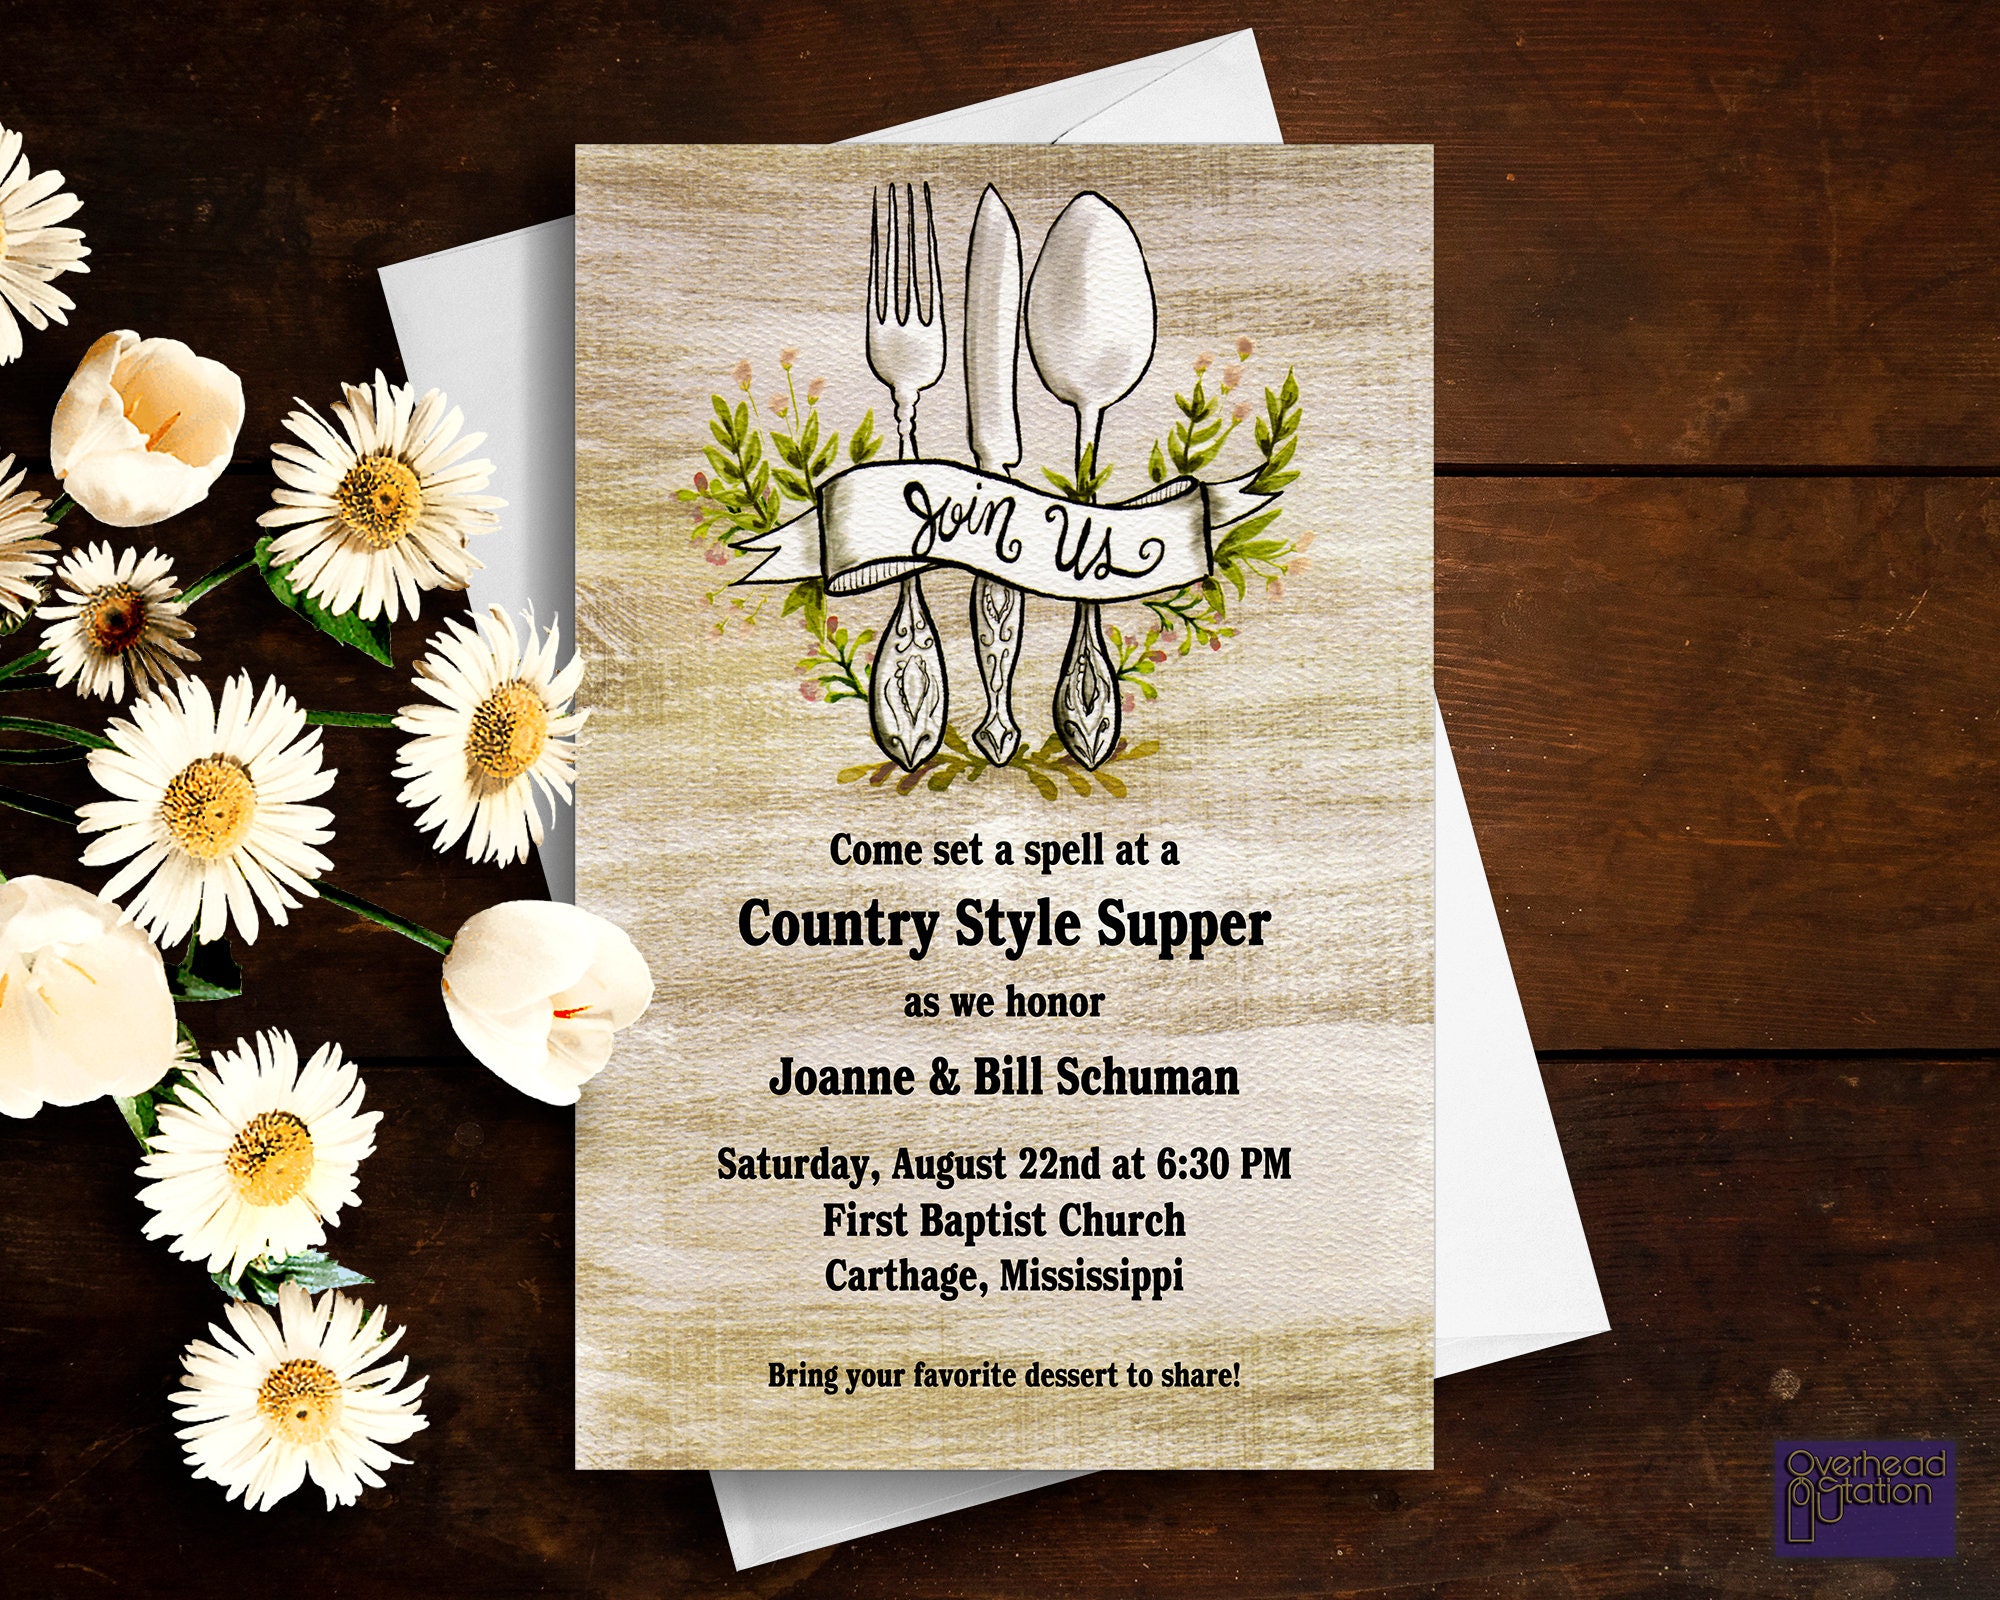 Join Us Rustic Style Church Meal Invitation image photo